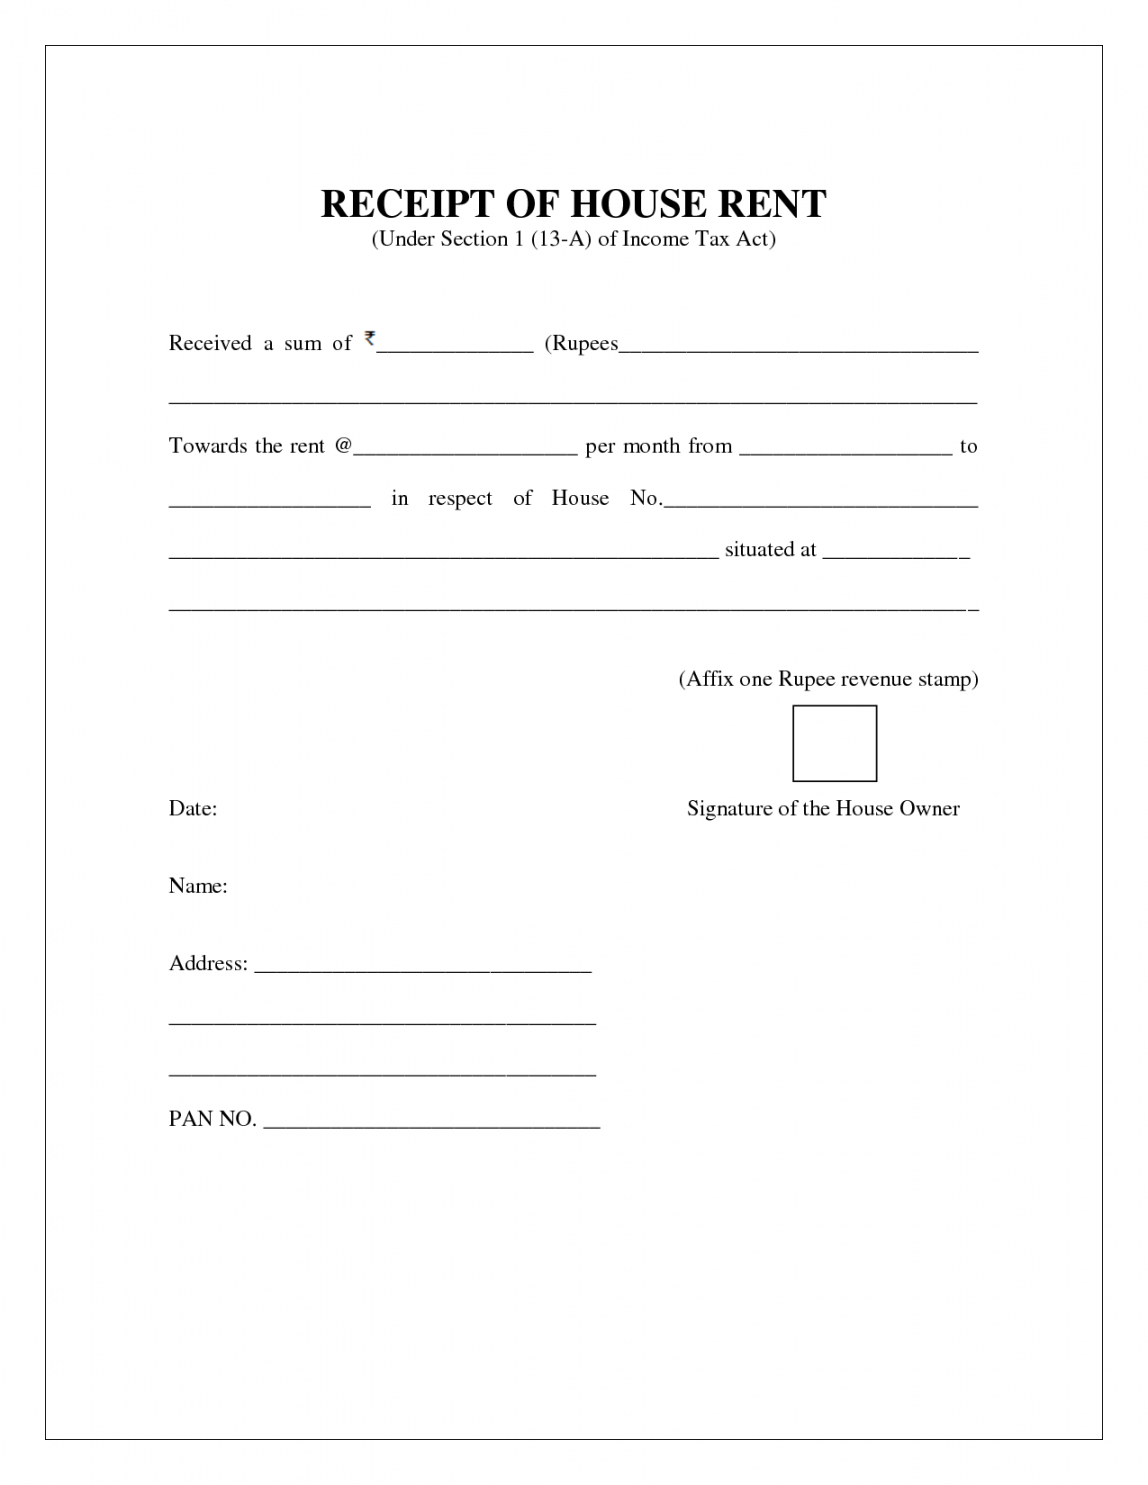 clever house rent receipt form and template sample for your house rent receipt template sample